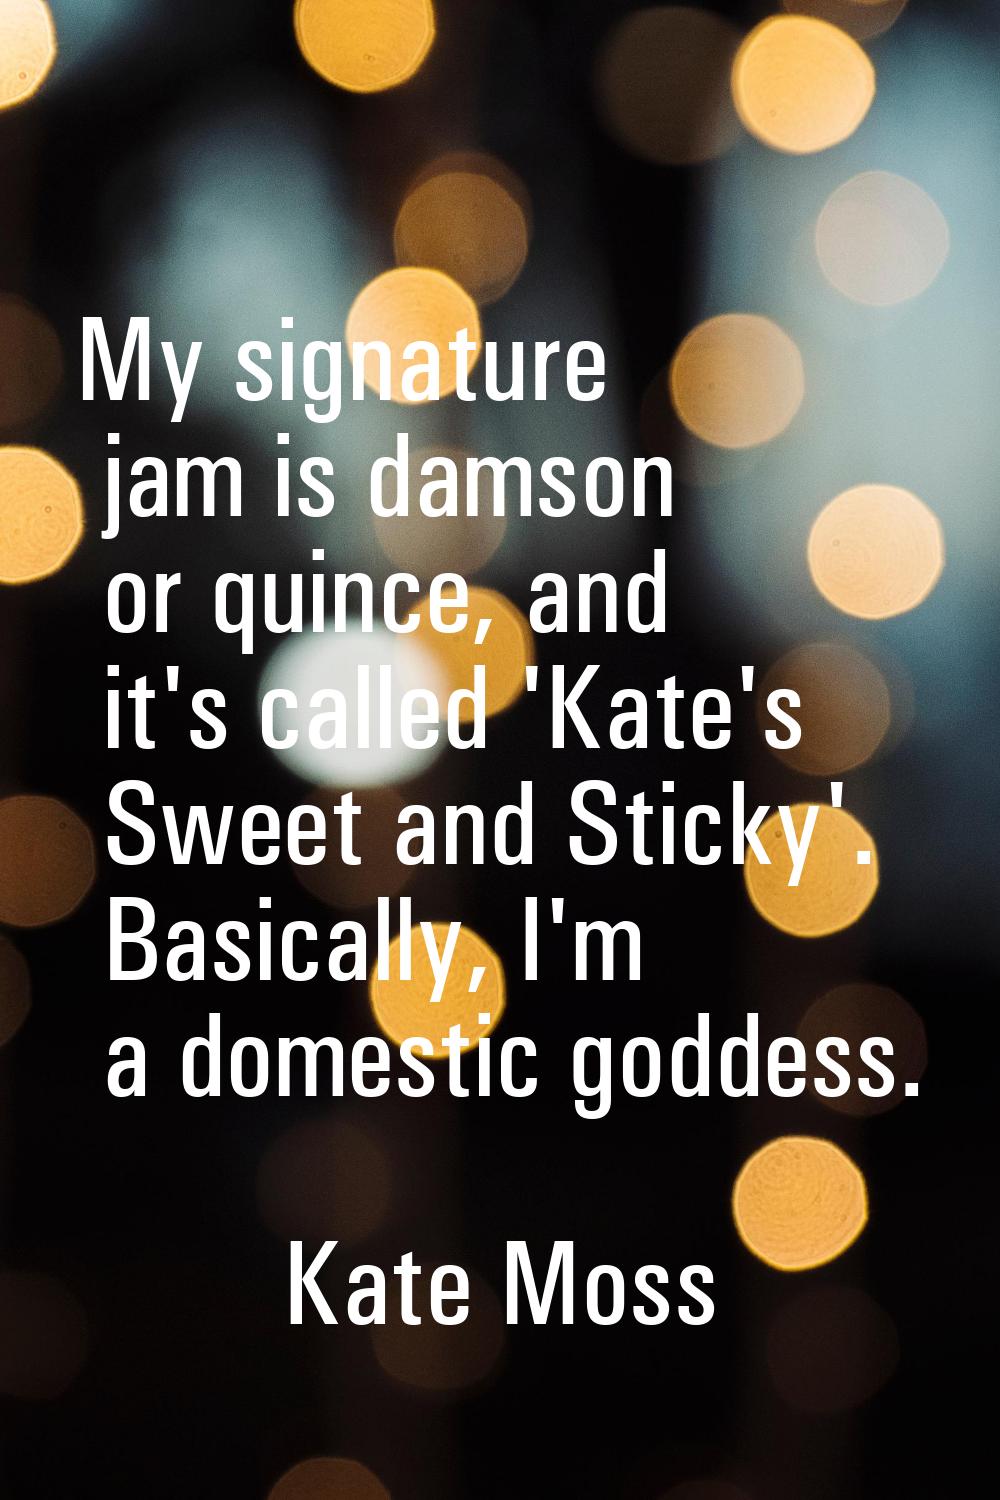 My signature jam is damson or quince, and it's called 'Kate's Sweet and Sticky'. Basically, I'm a d